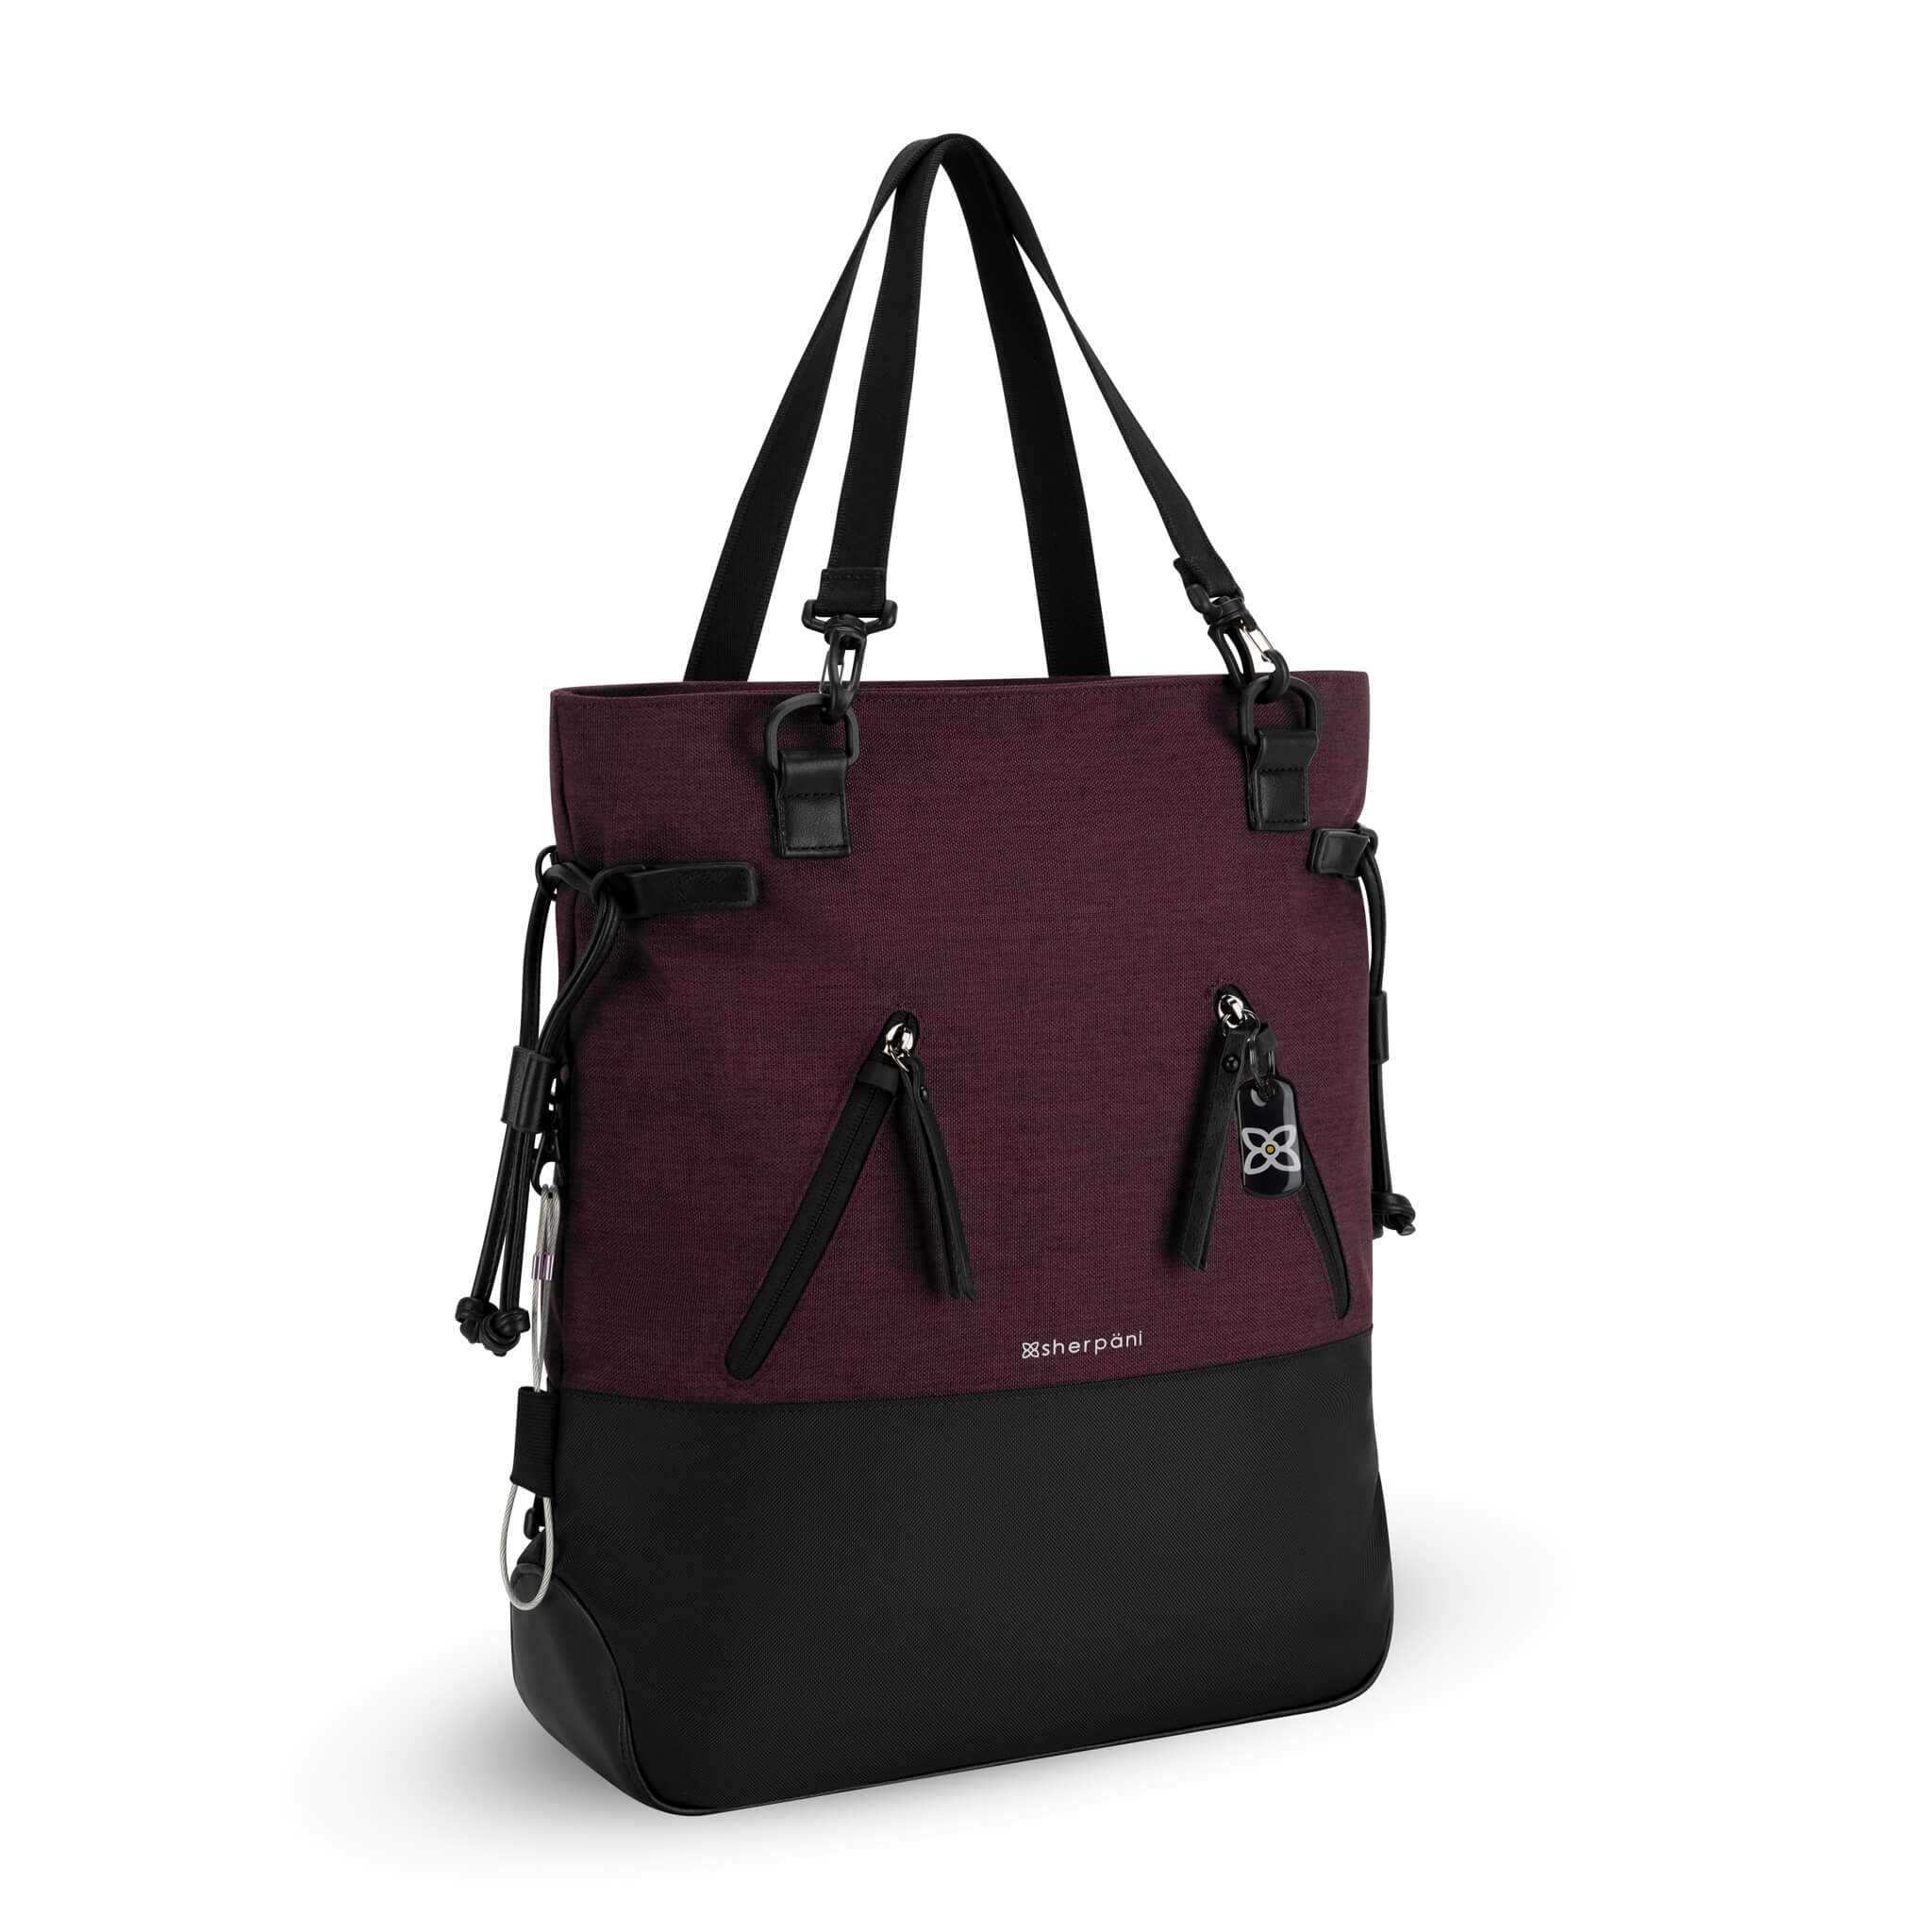 Angled front view of the Sherpani Anti-Theft tote backpack, the Tempest in Merlot. The convertible bag includes RFID protection, locking zipper pockets, adjustable straps, and a trolley sleeve. #color_merlot